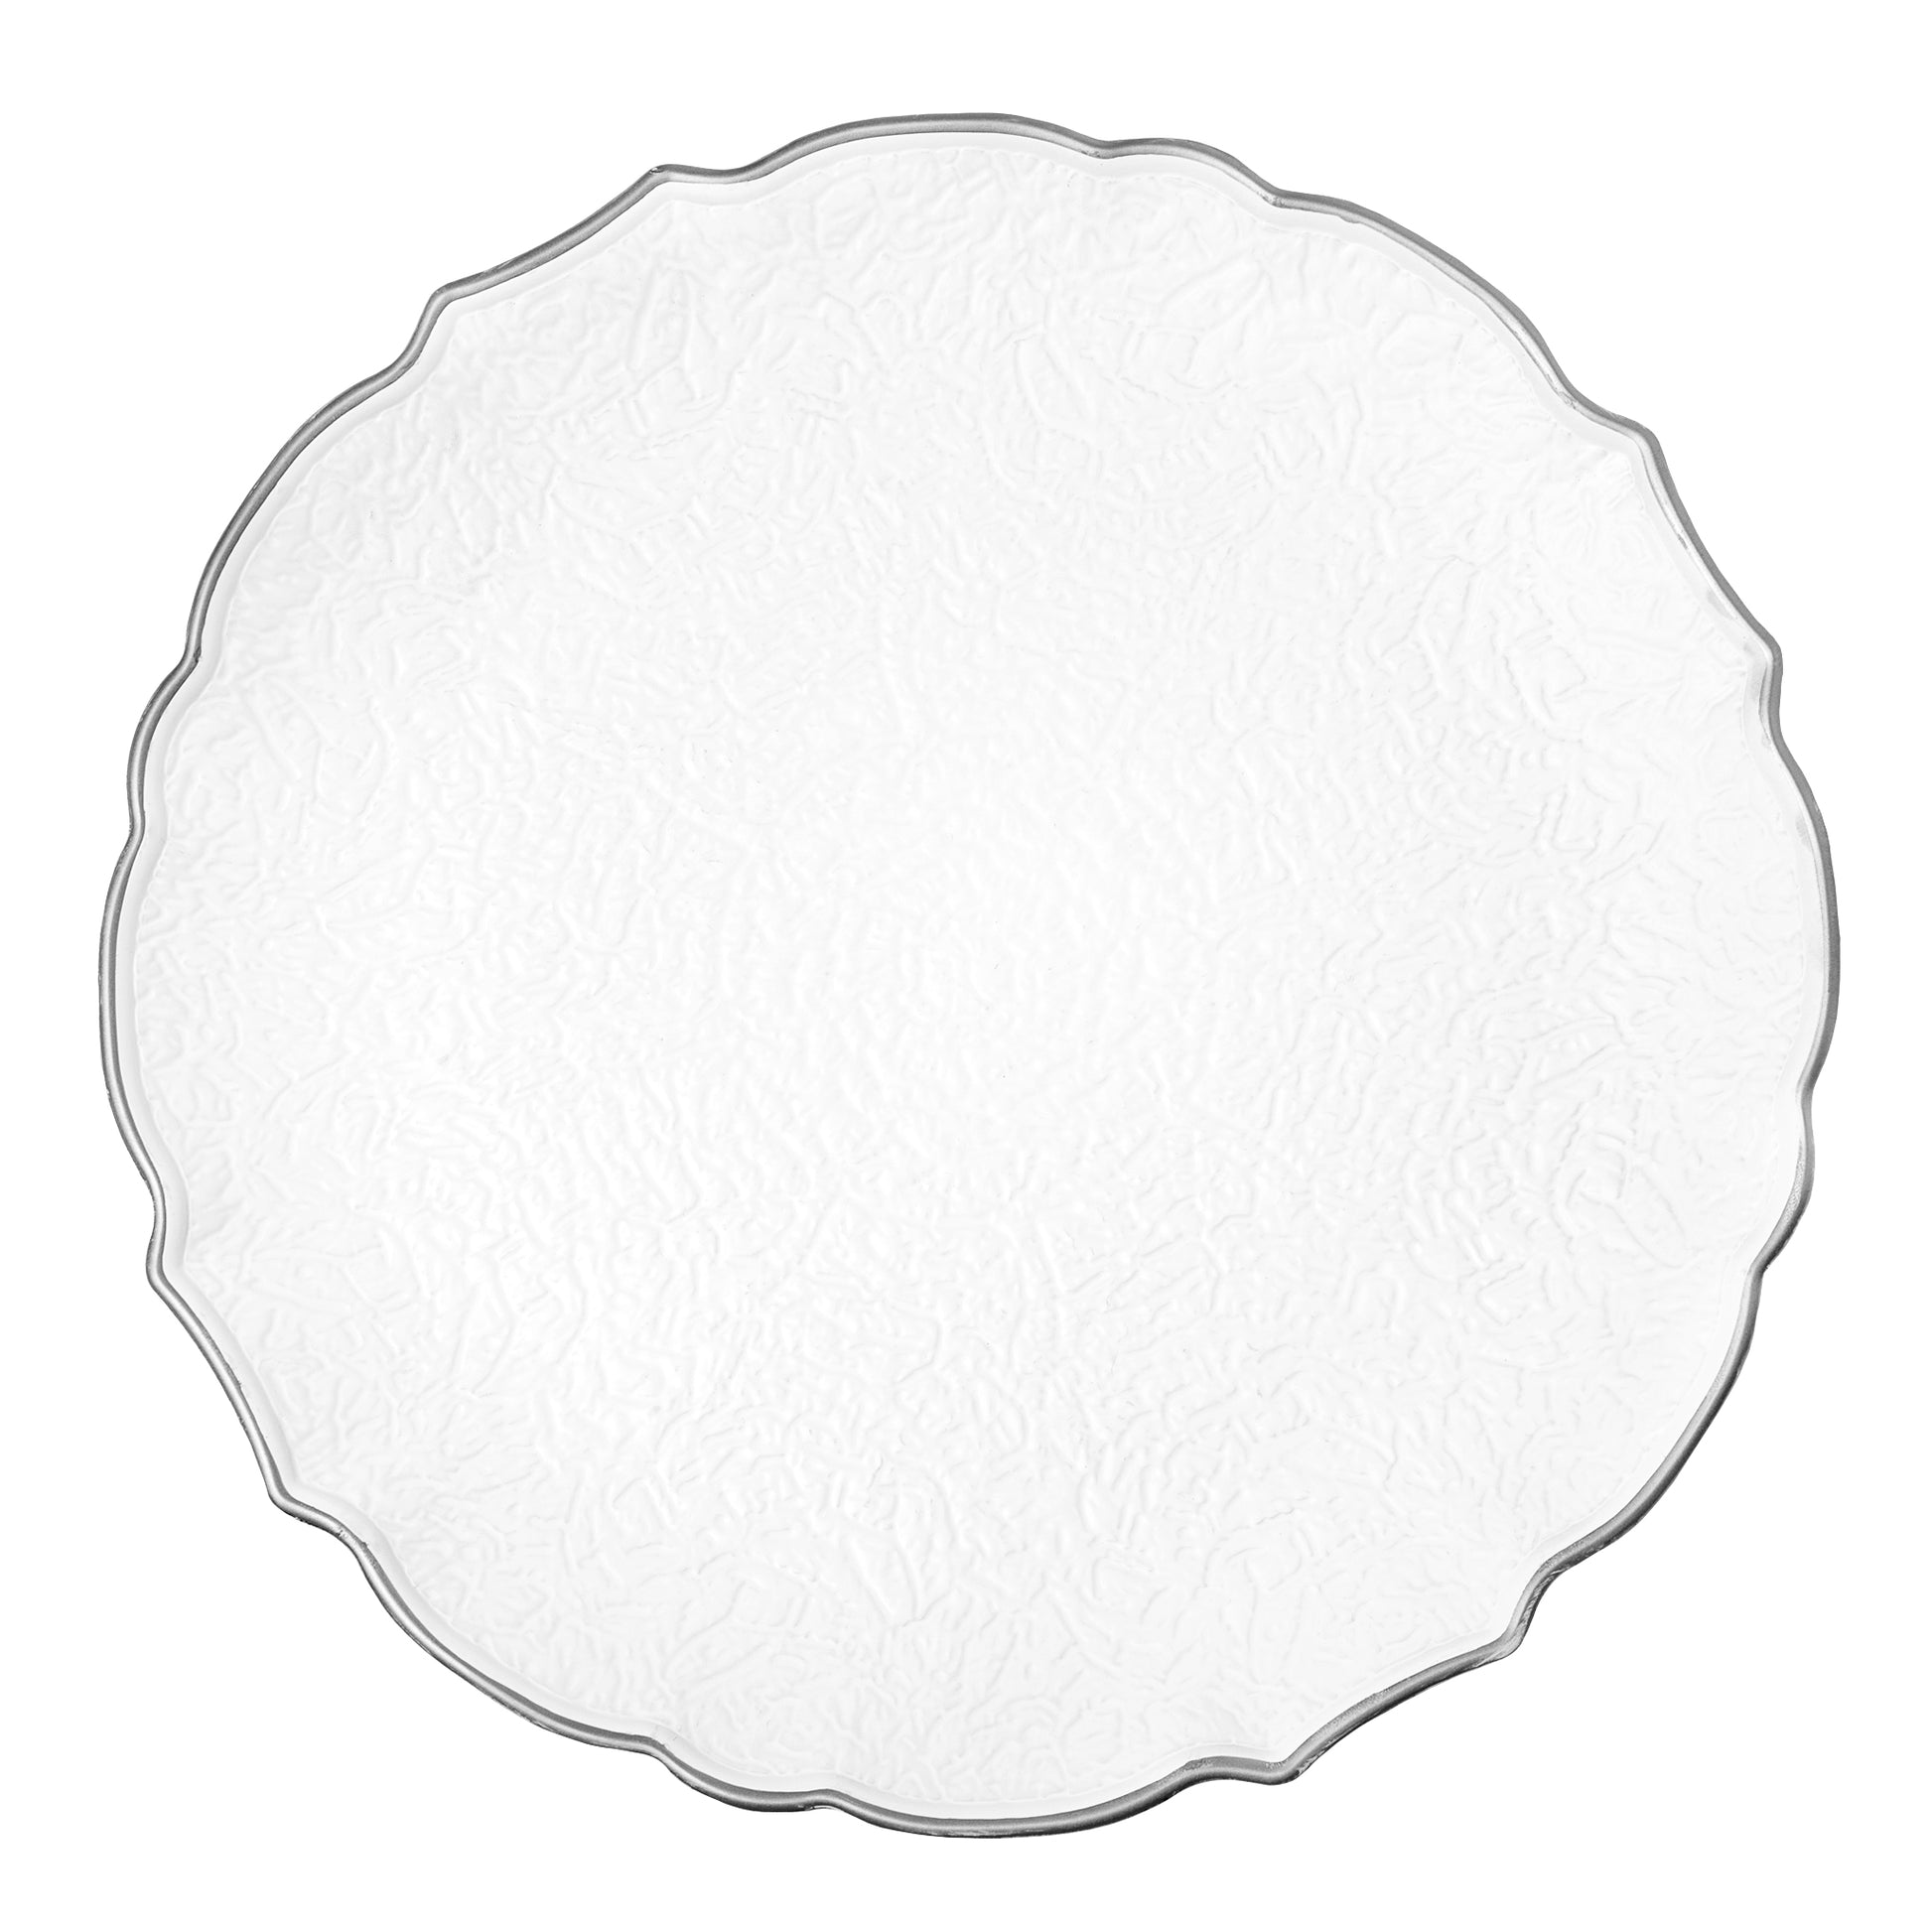 Victorian Embossed Acrylic Charger Plate - White Silver-Trimmed - CV Linens